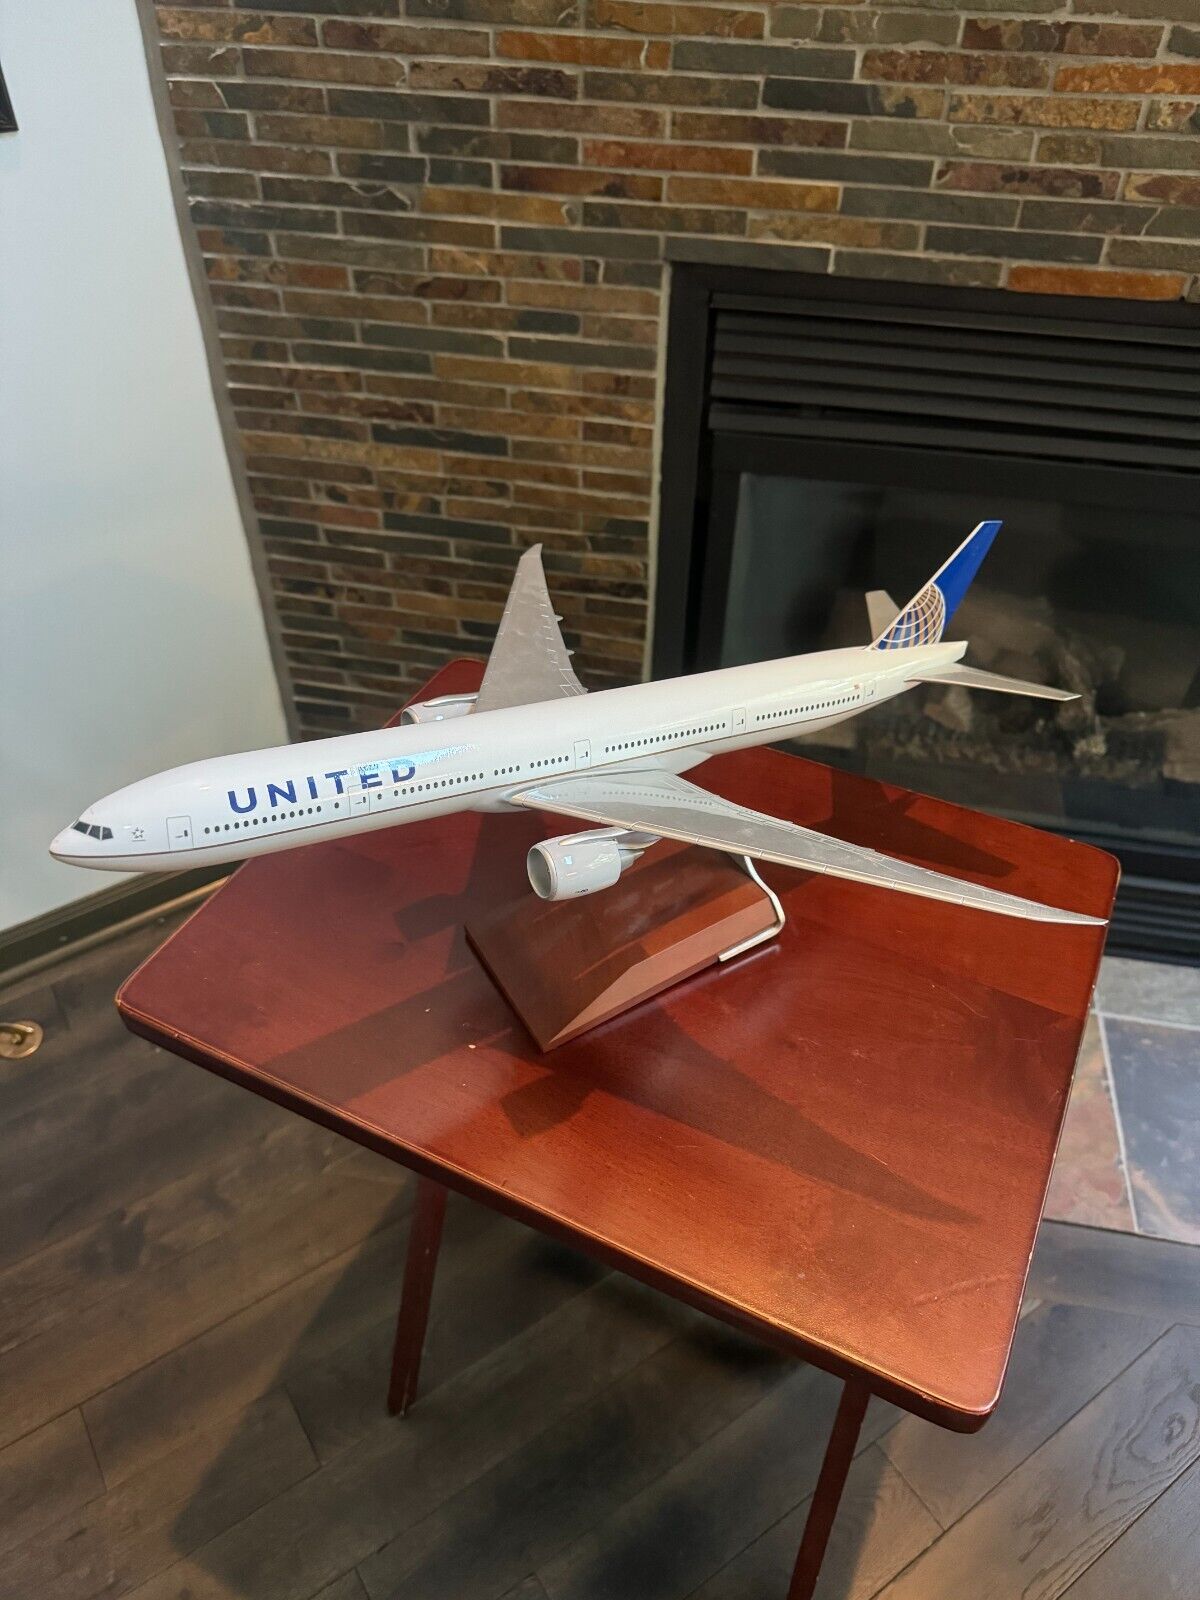 PacMin United Airlines Boeing 777-300ER Desk Top 1/144 Model Airplane 2019